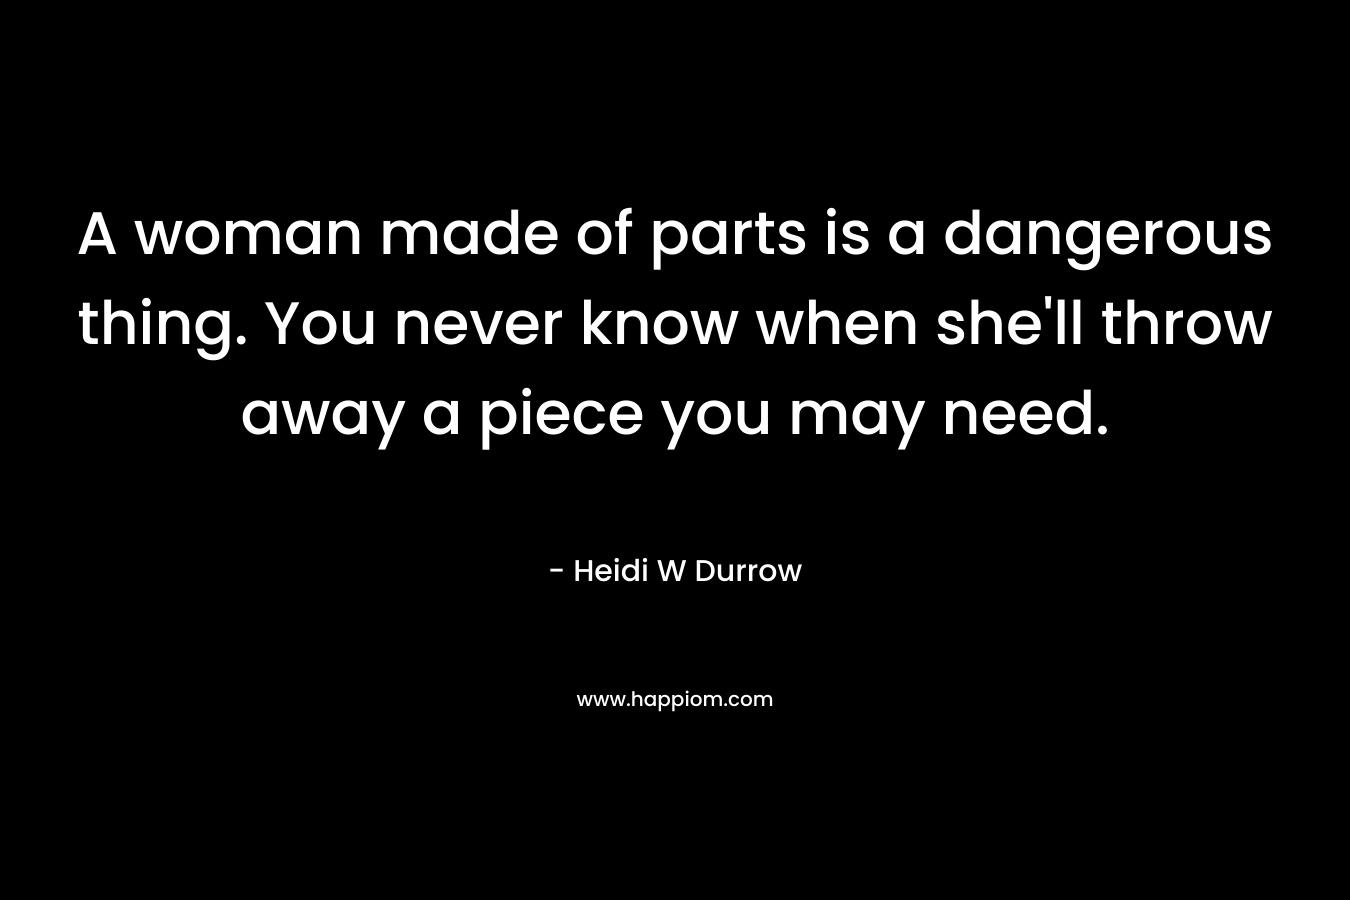 A woman made of parts is a dangerous thing. You never know when she'll throw away a piece you may need.